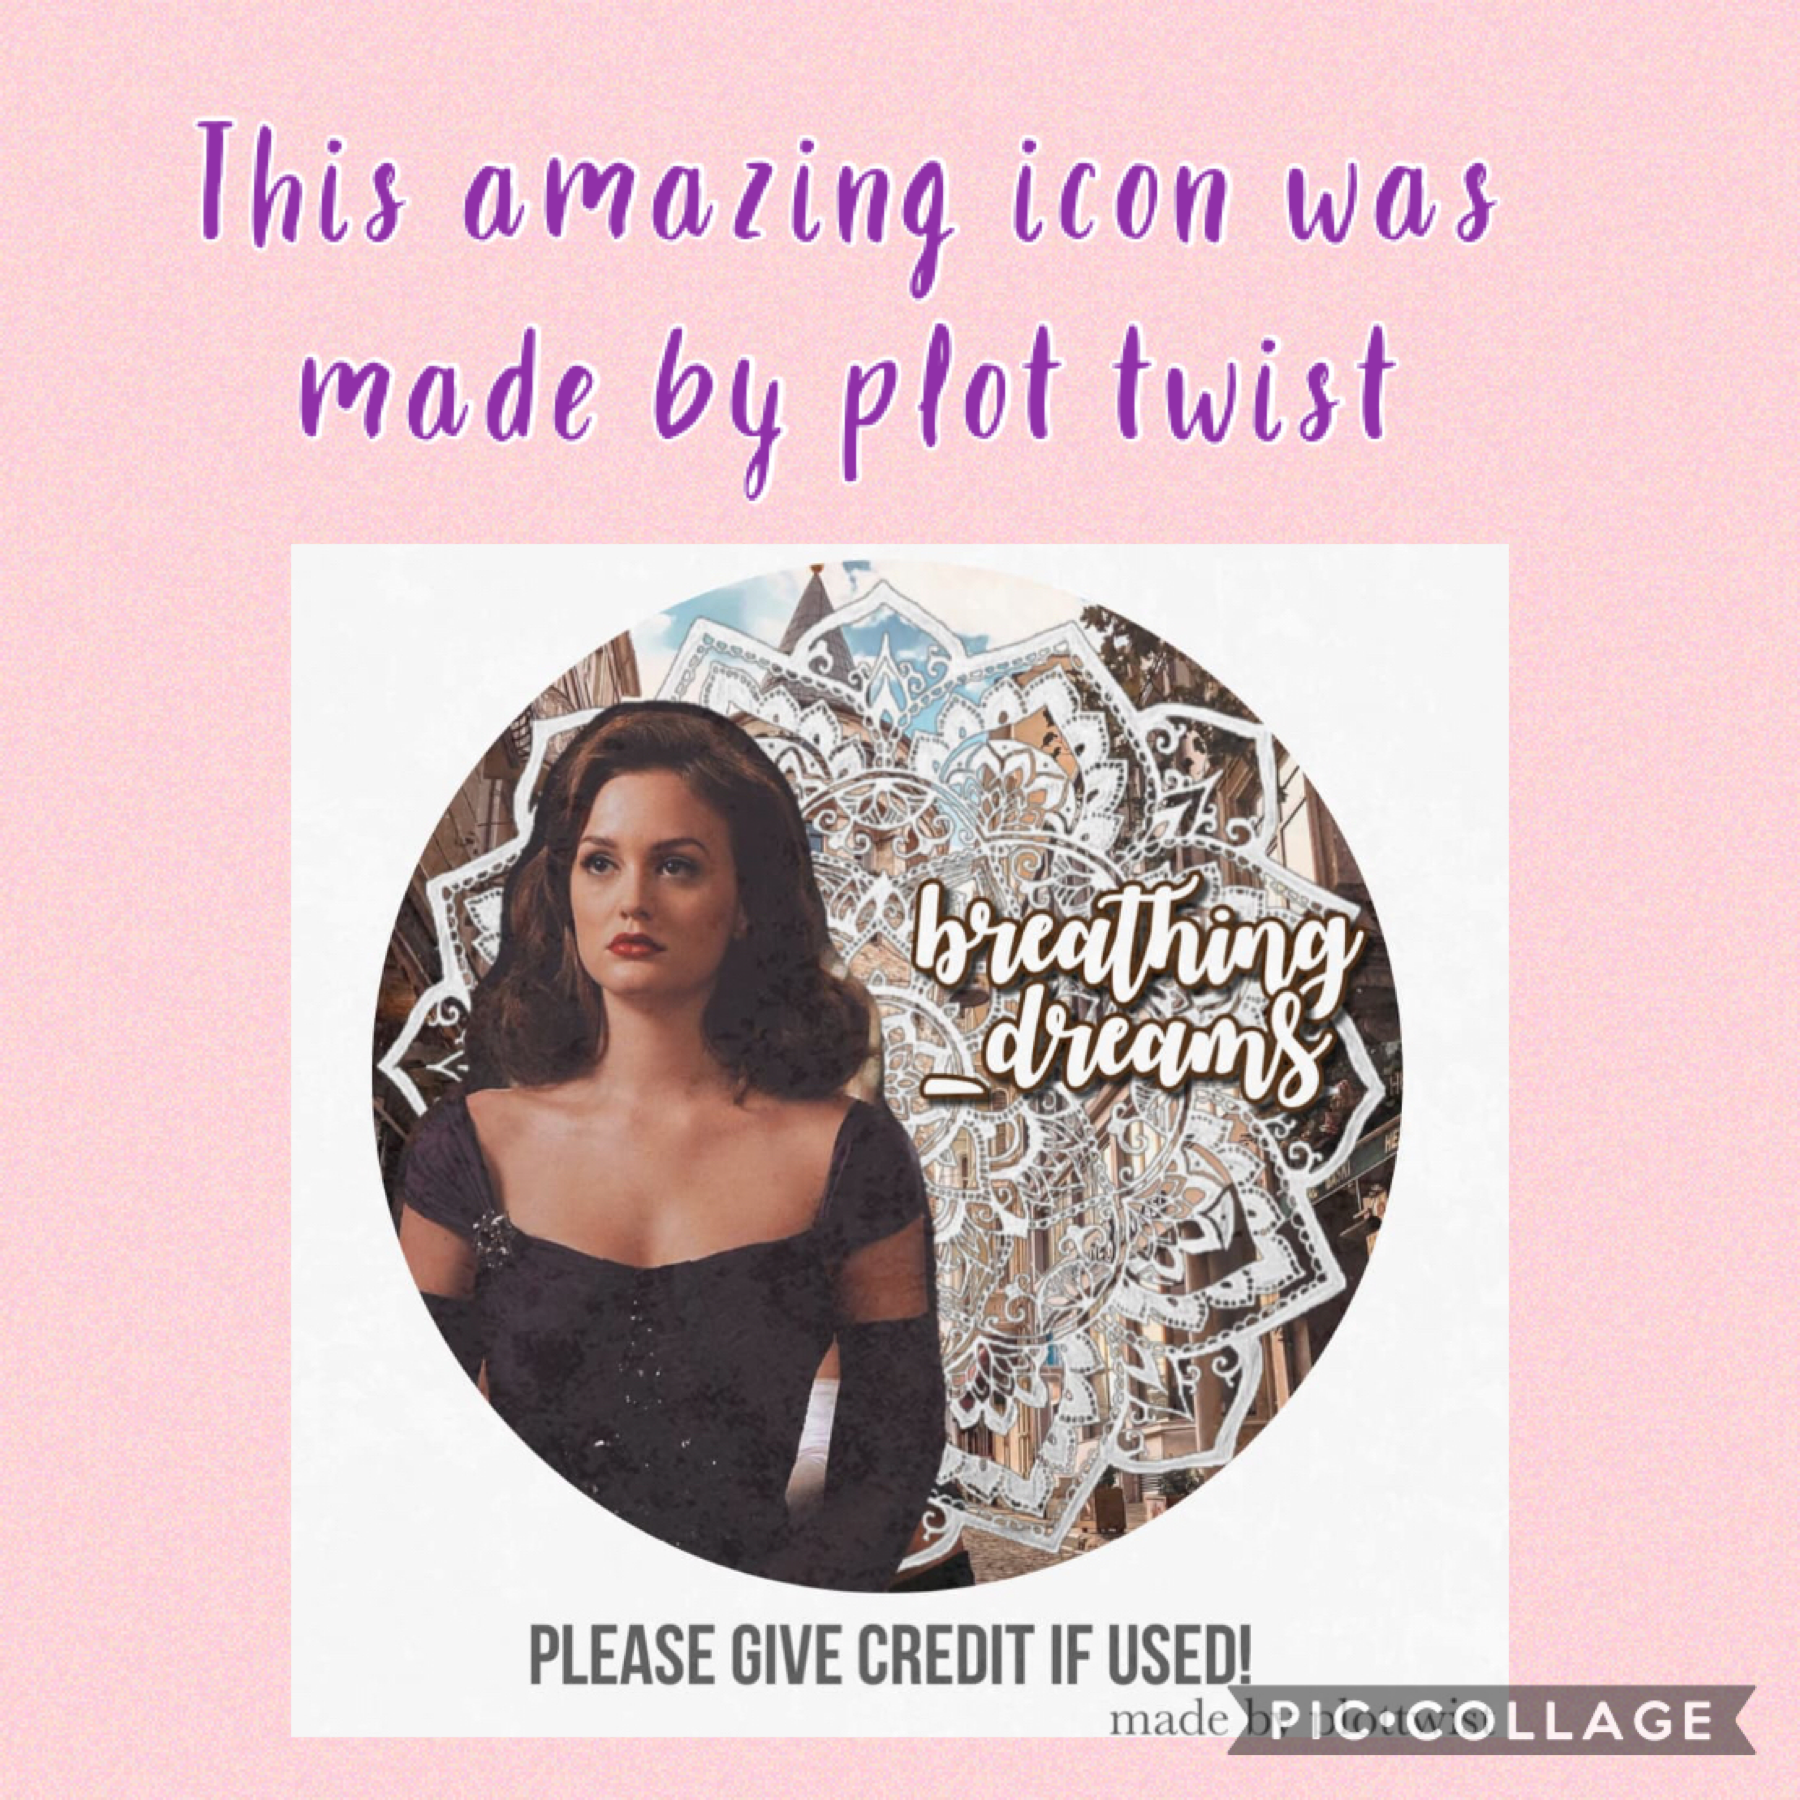 This amazing icon was made by plot twist